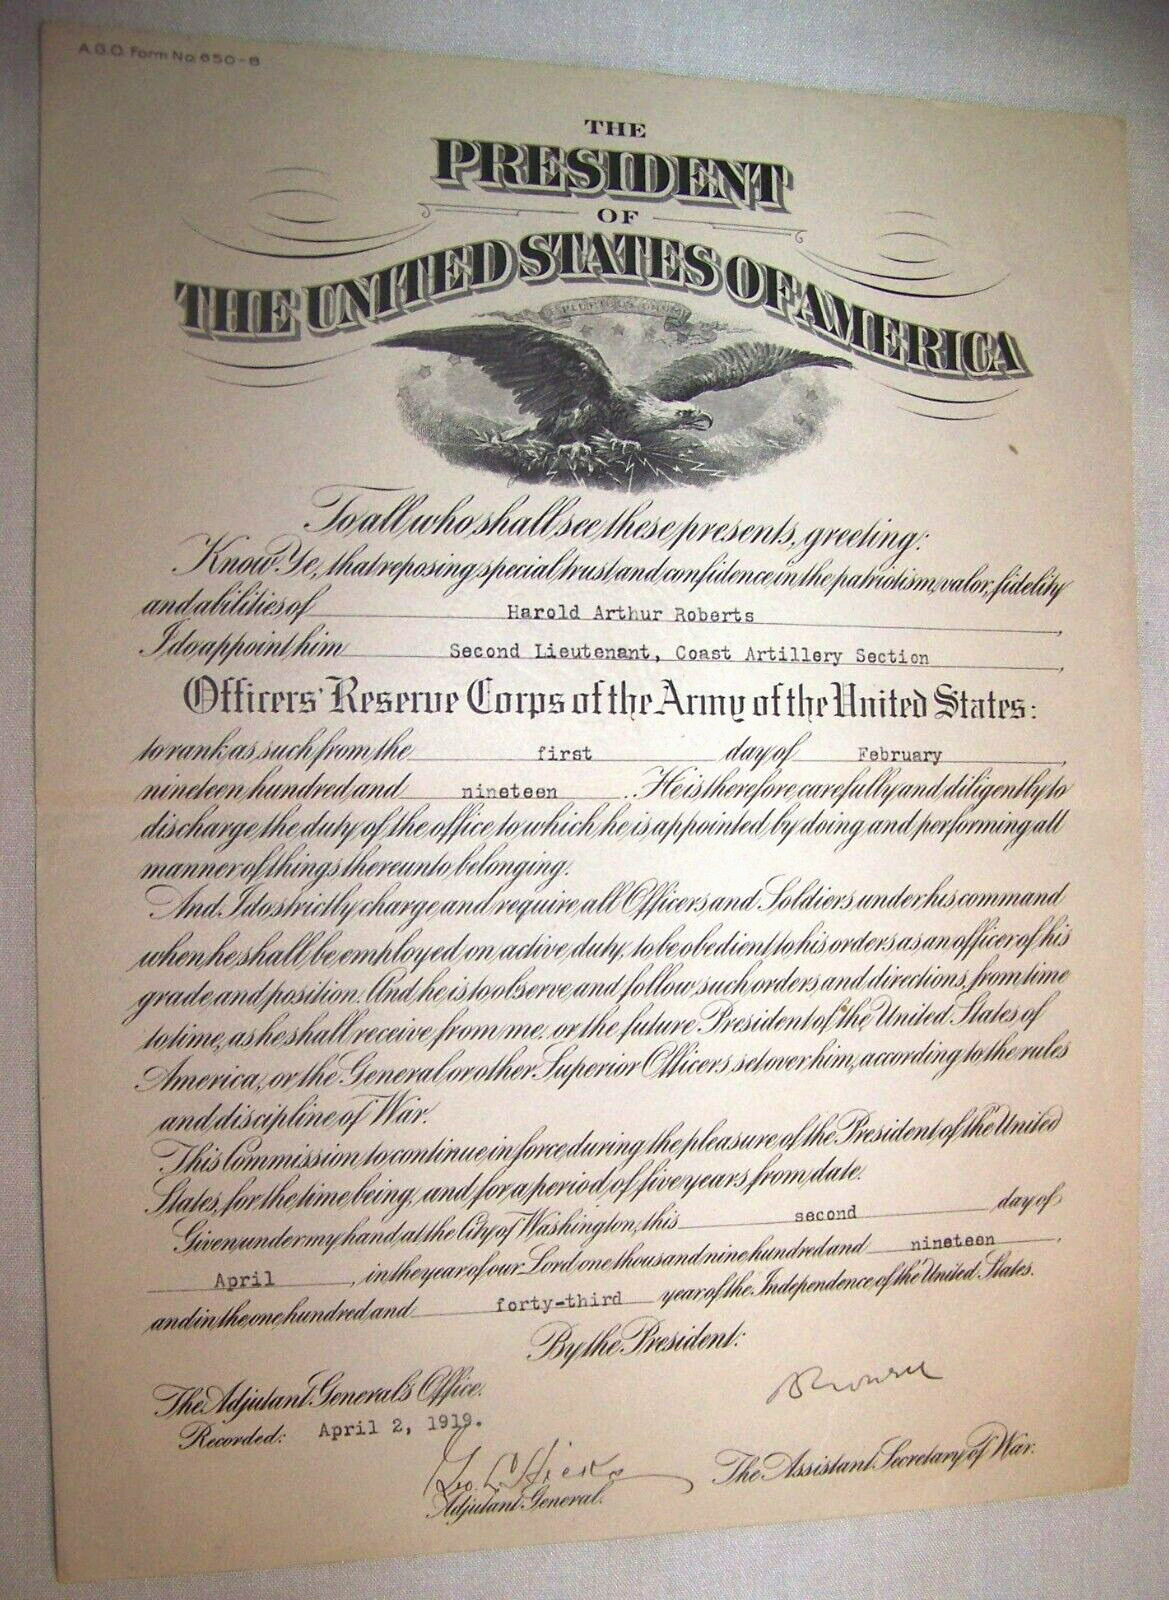 1919 2ND LIEUTENANT US COAST GUARD OFFICER APPOINTMENT ARMY RESERVE DOCUMENT